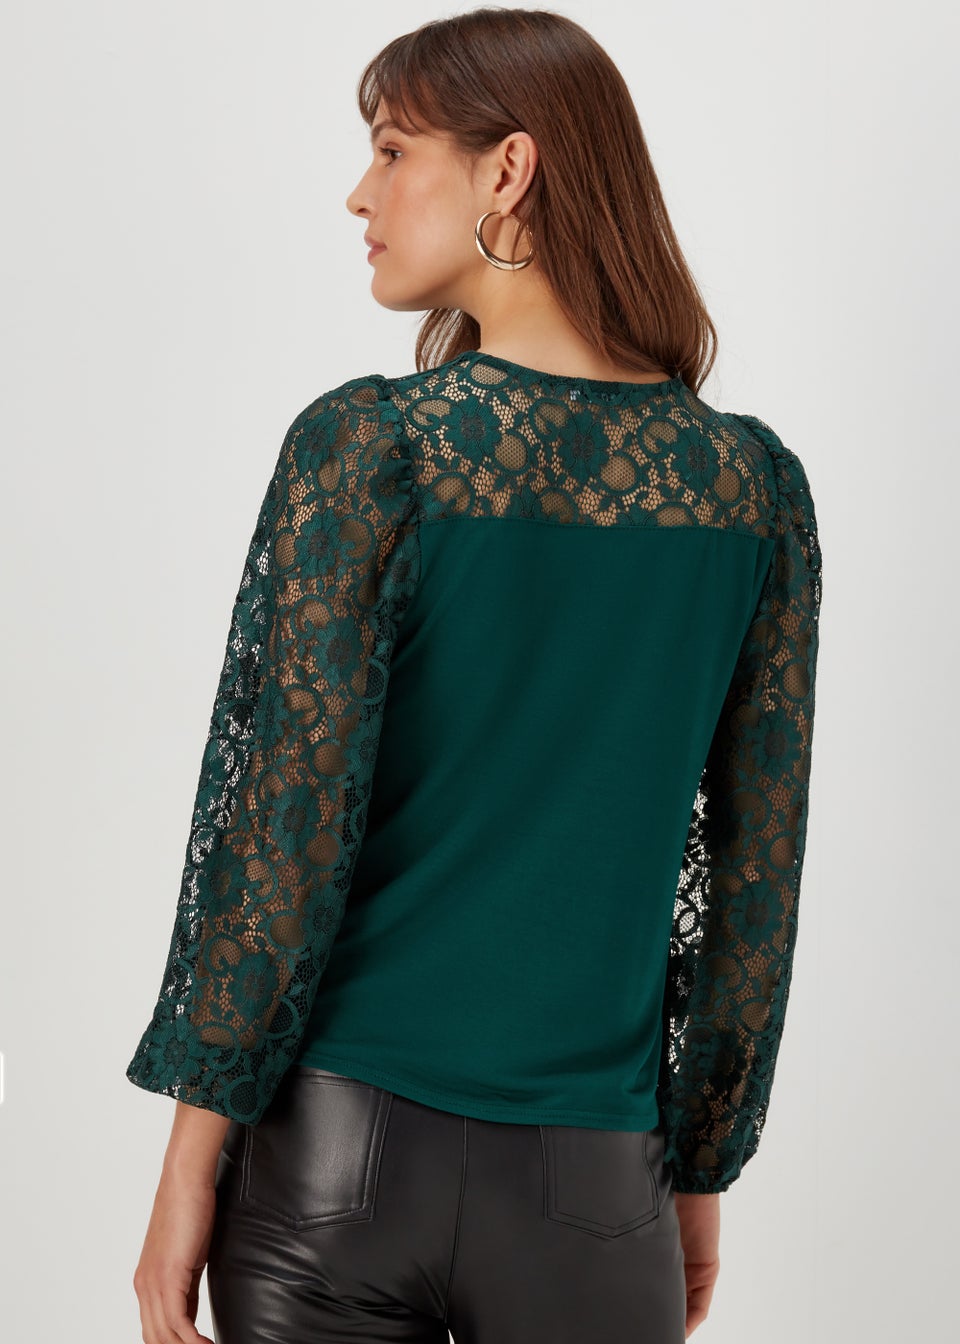 Green Lace Long Sleeve Top